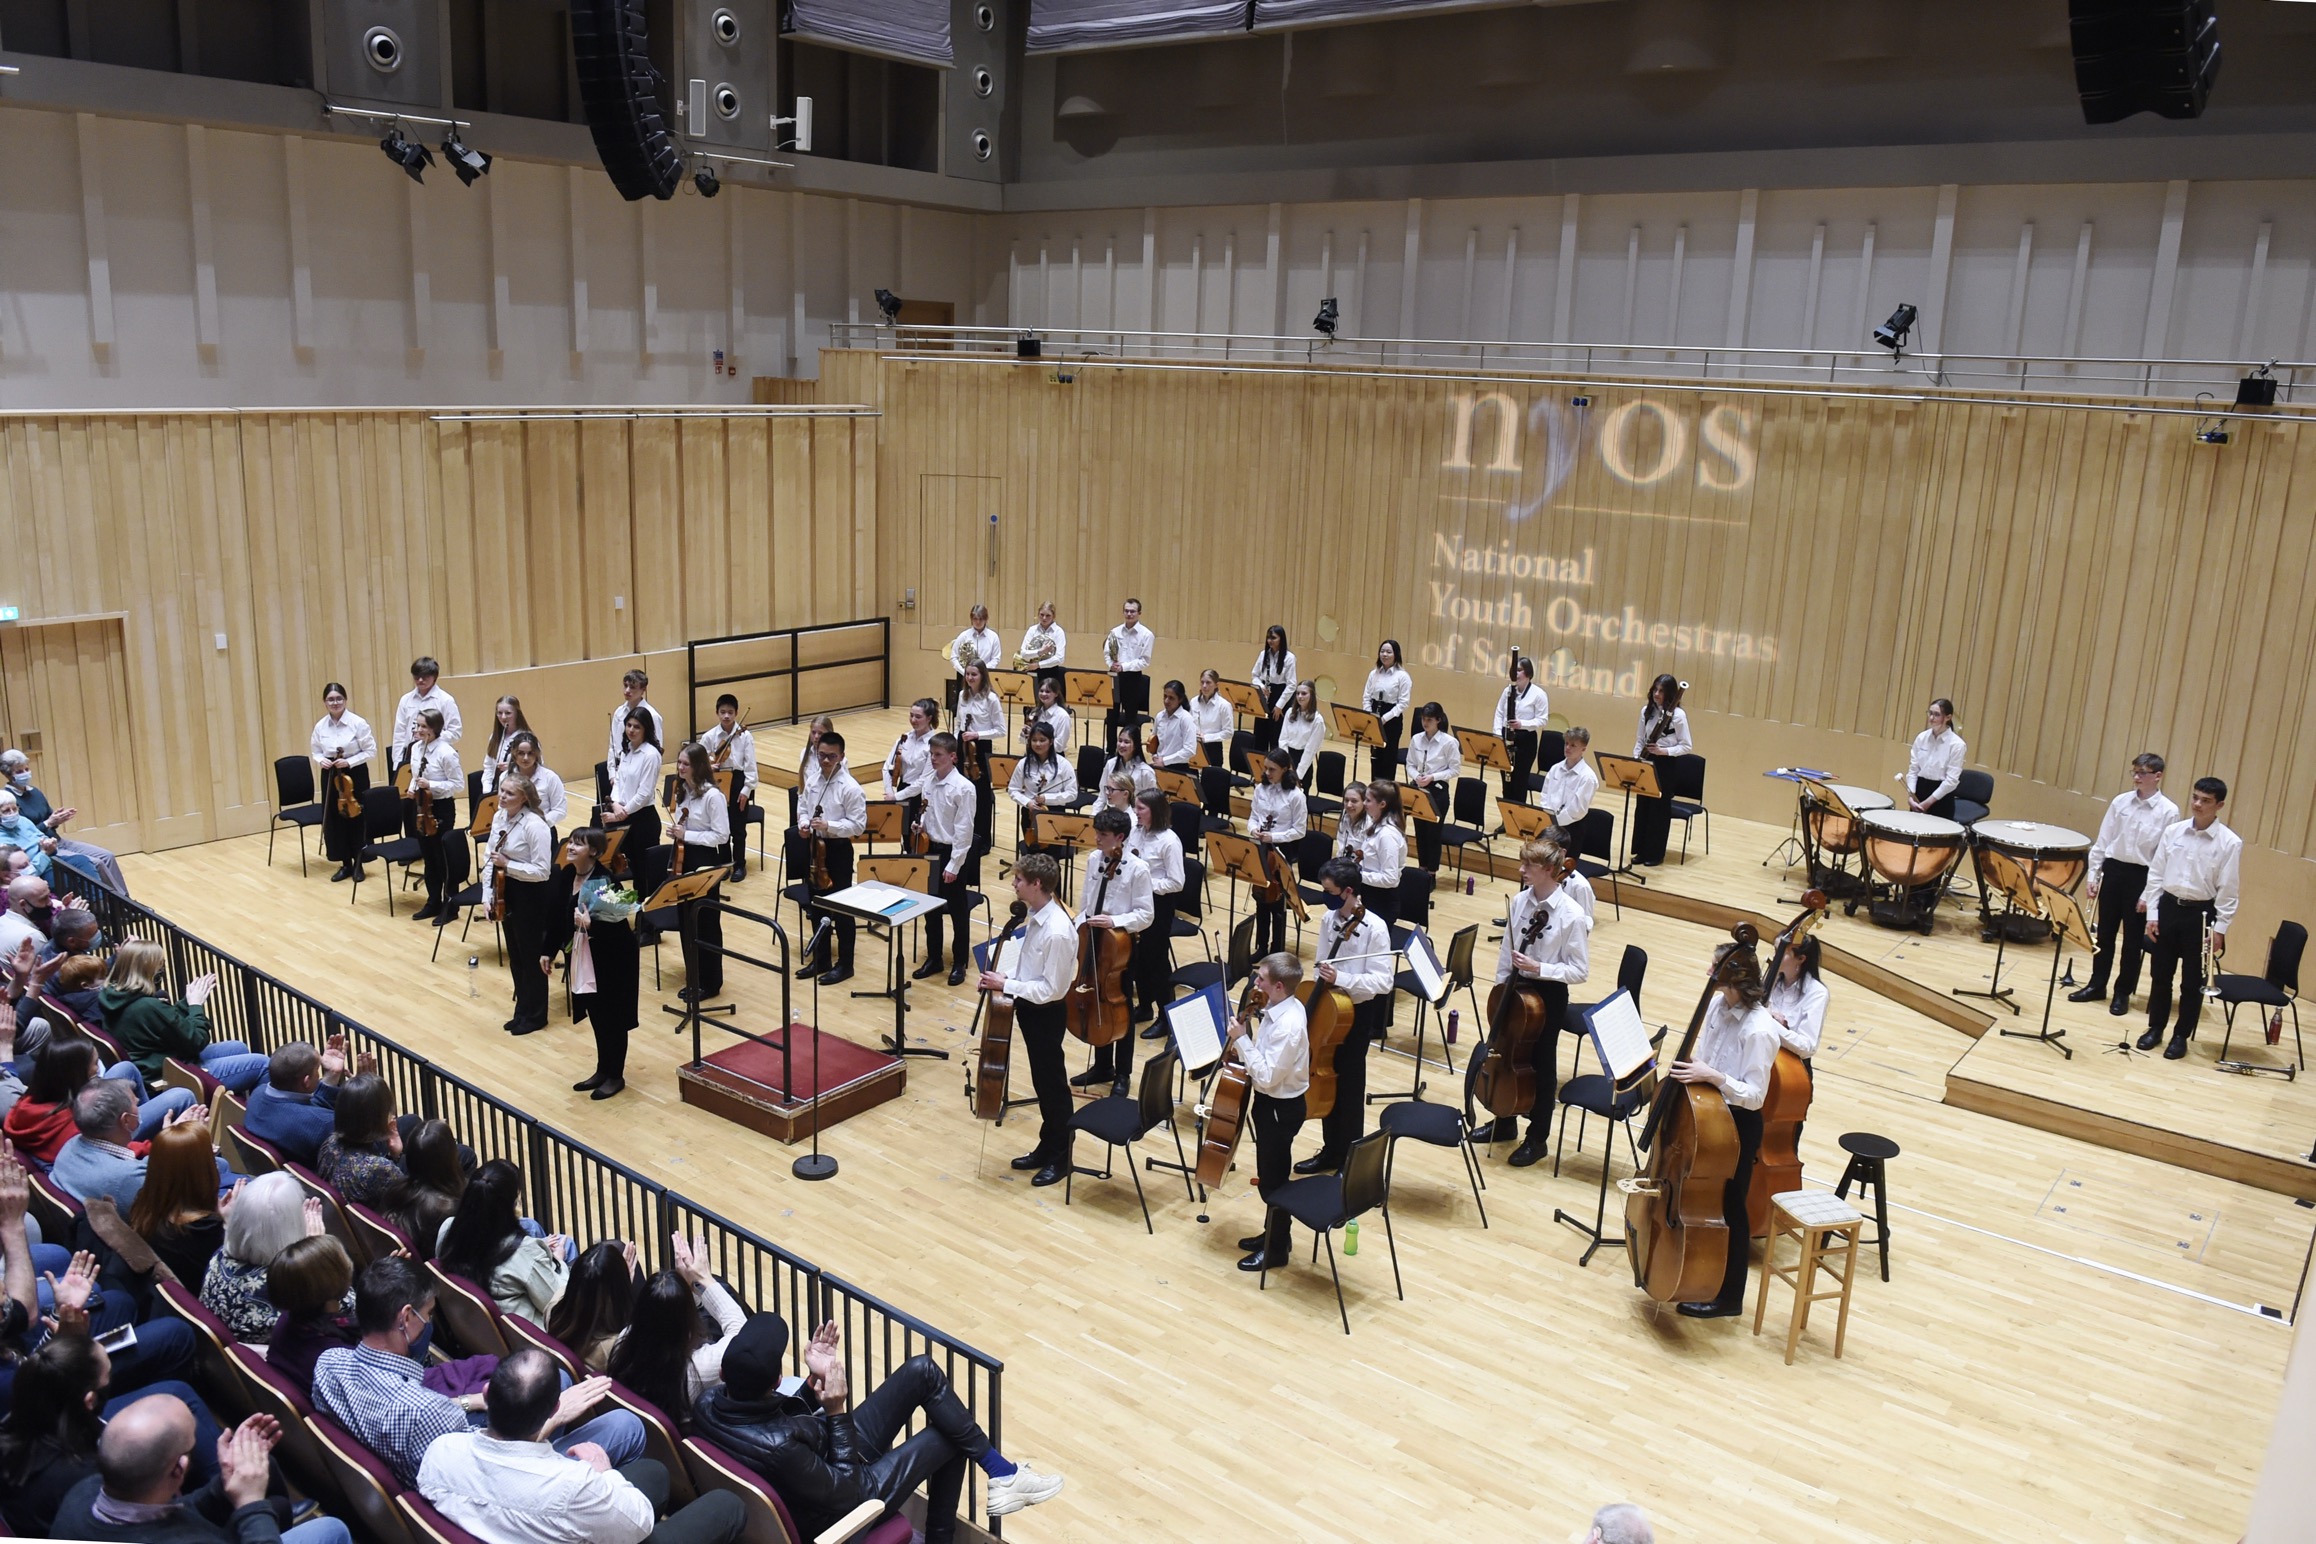 NYOS Senior Orchestra on stage at the New Auditorium at Glasgow Royal Concert Hall